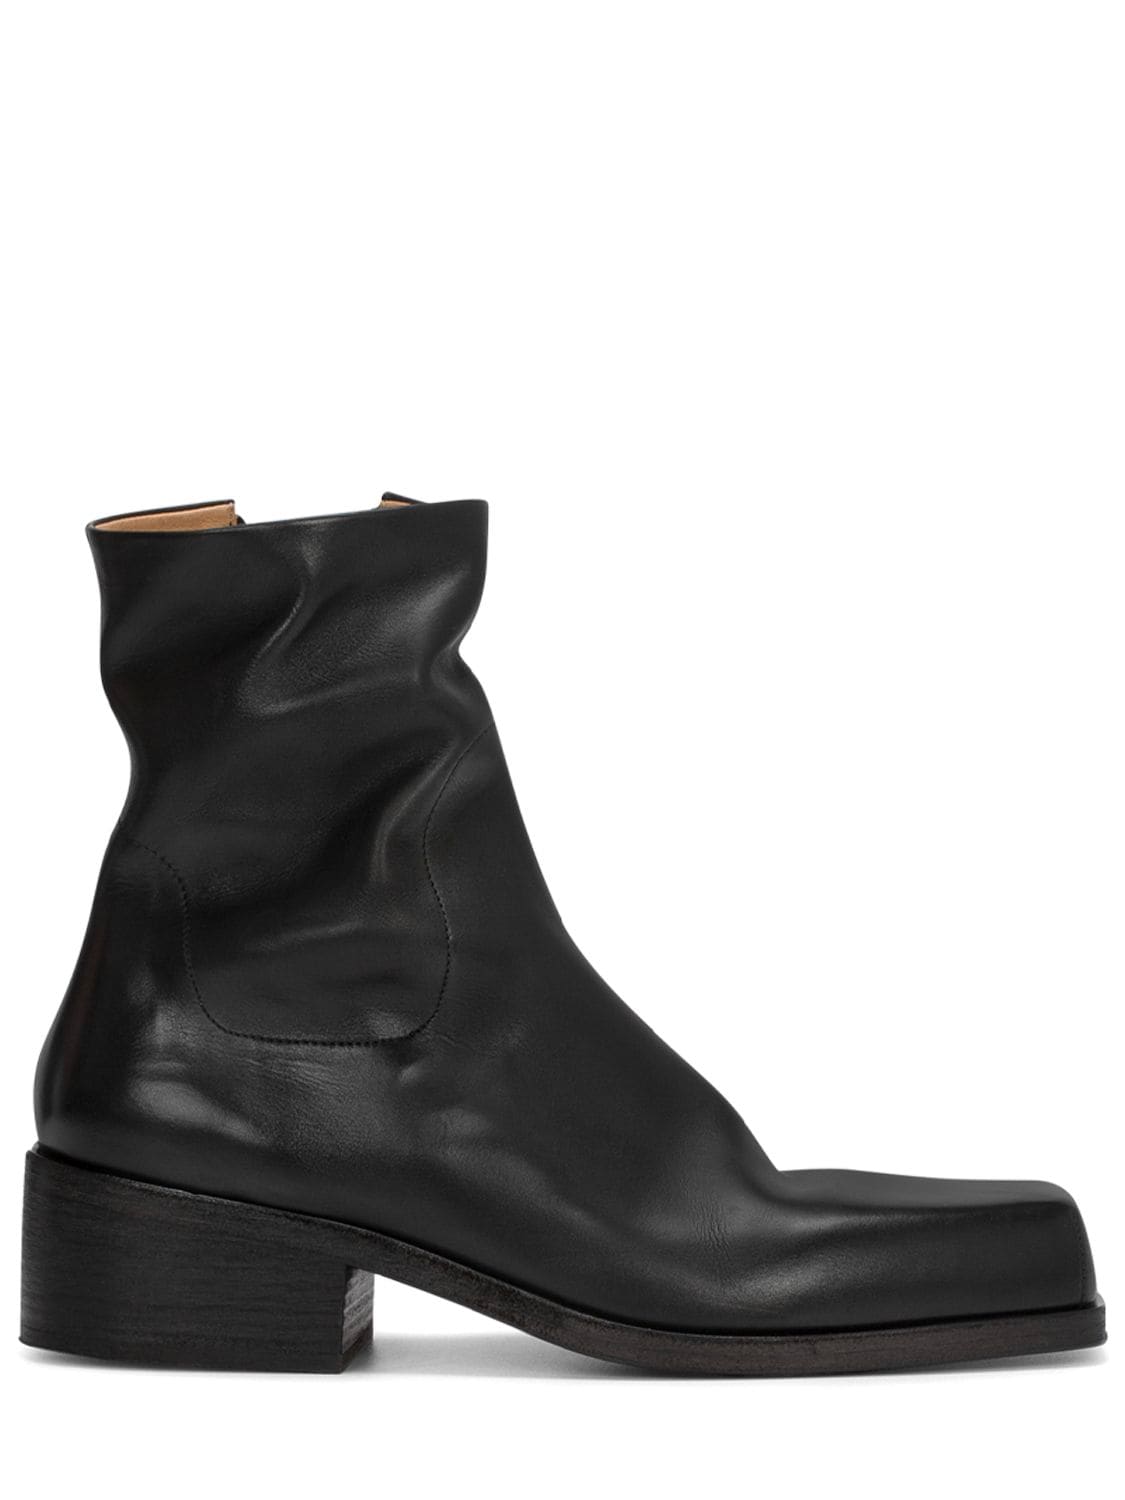 Image of Cassello Leather Boots